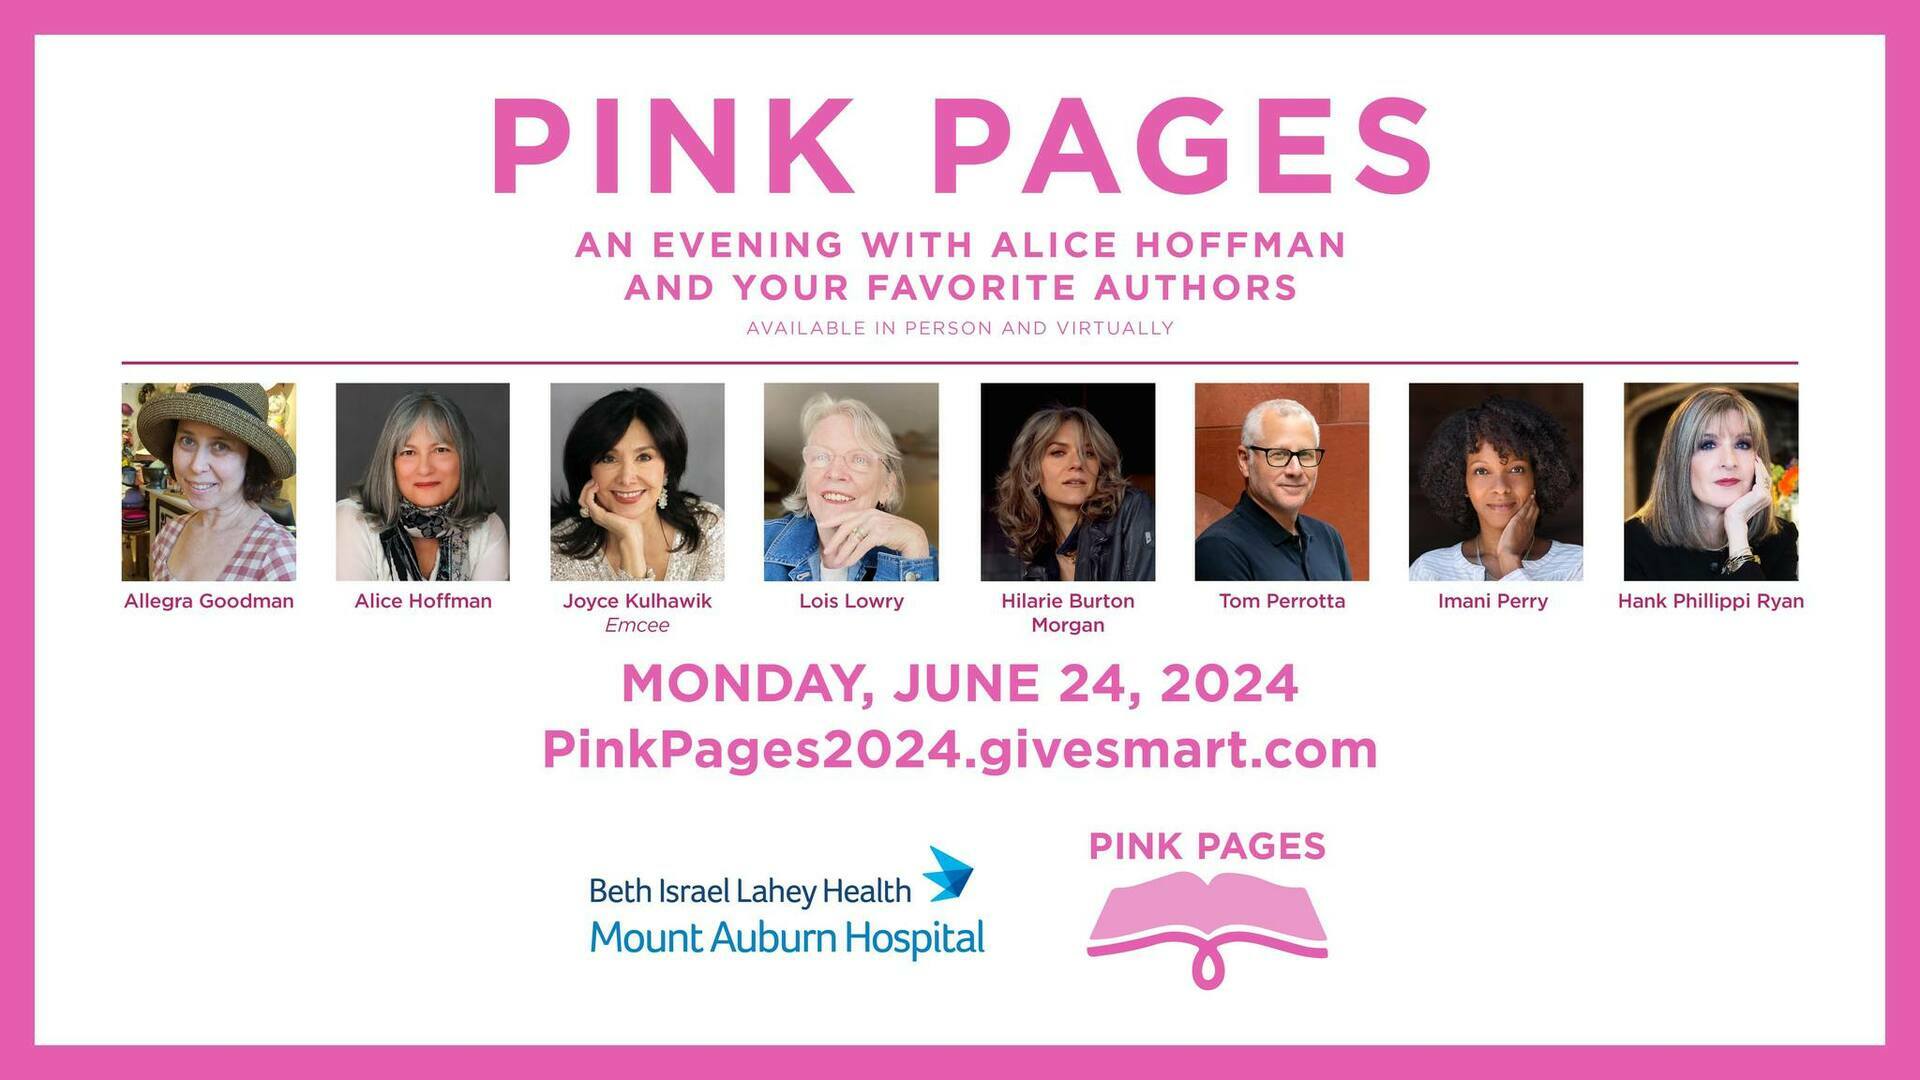 Mount Auburn Hospital presents Pink Pages, Live on June 24th at the American Repertory Theatre, Cambridge, Massachusetts, United States